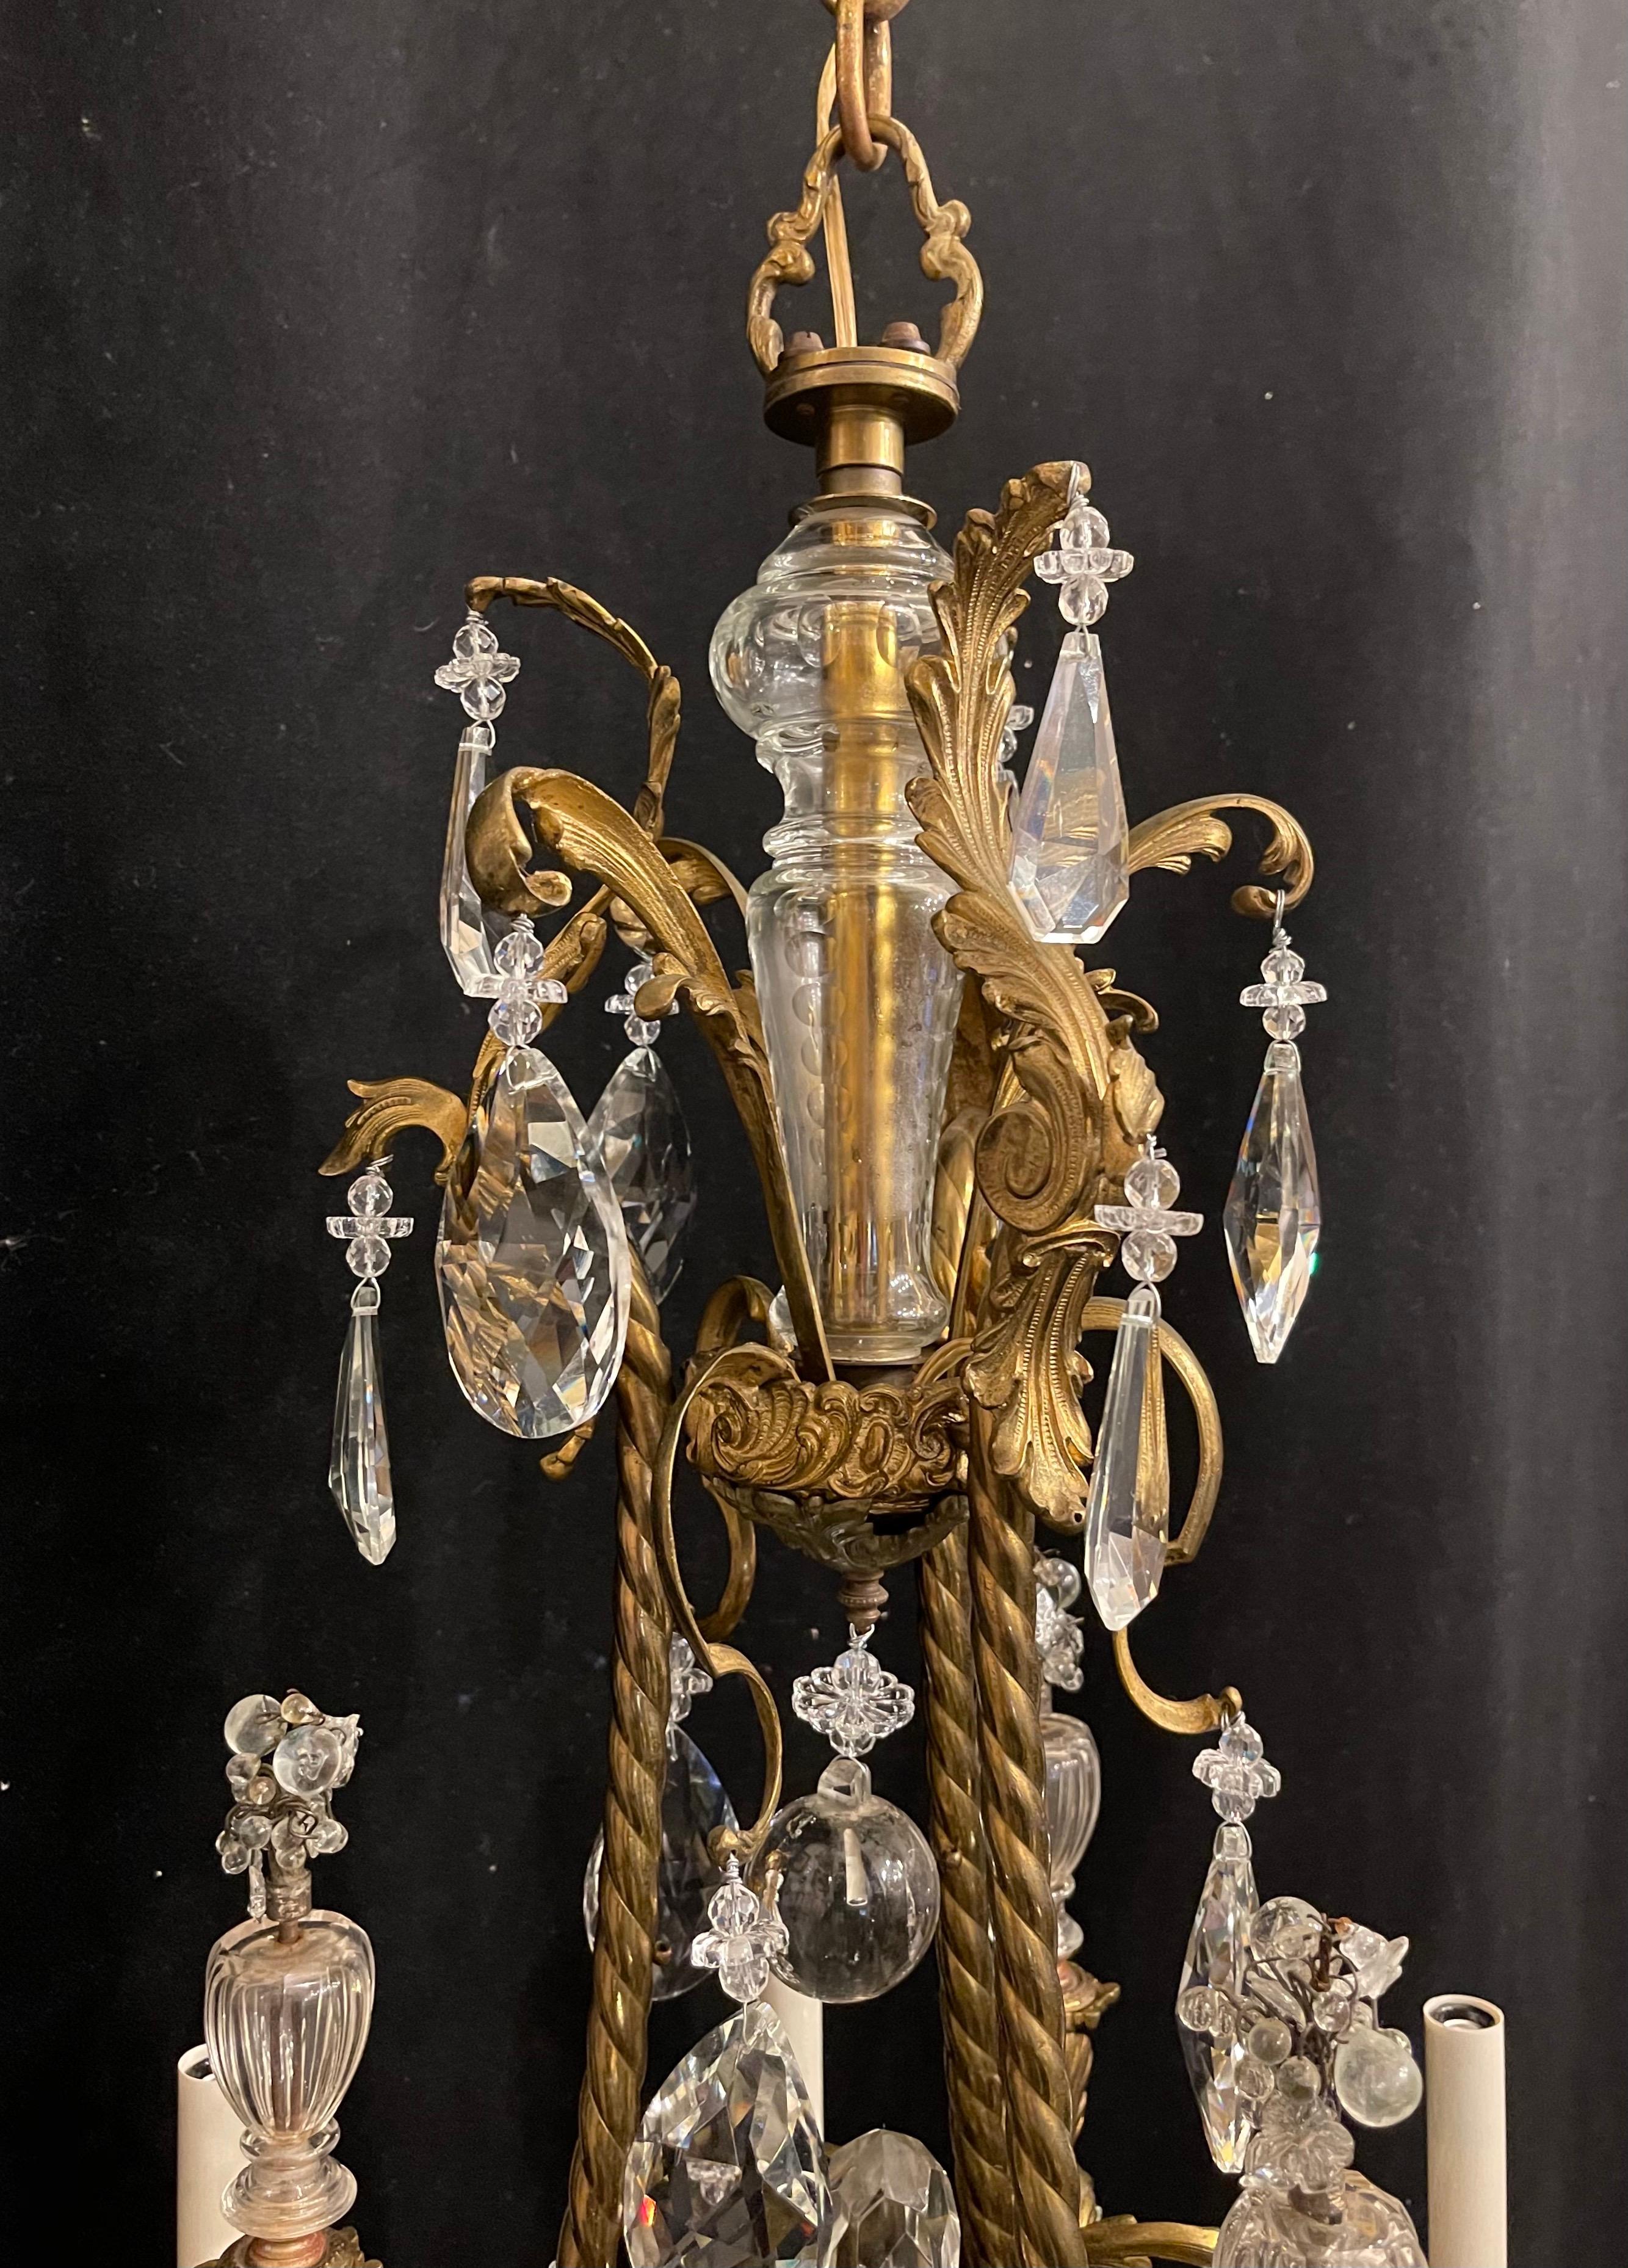 A wonderful French Rococo gilt bronze garland cage & crystal basket chandelier with 6 candelabras light, completely rewired with new sockets and comes with chain canopy and mounting hardware for installation.